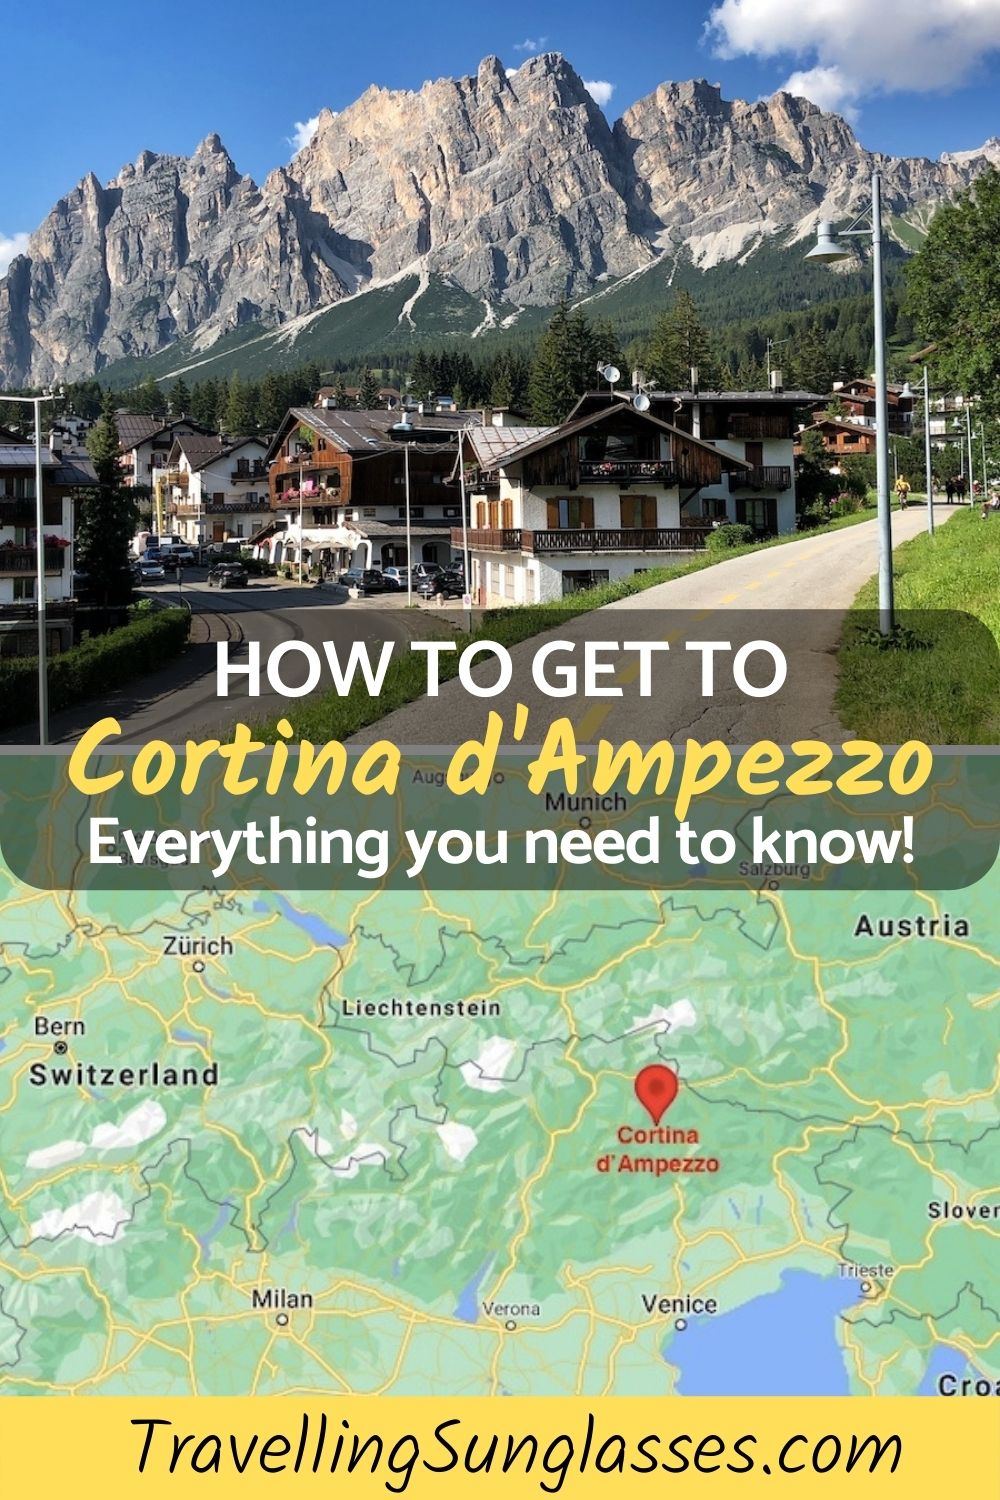 How to get to Cortina d'Ampezzo and the Dolomites Travelling Sunglasses